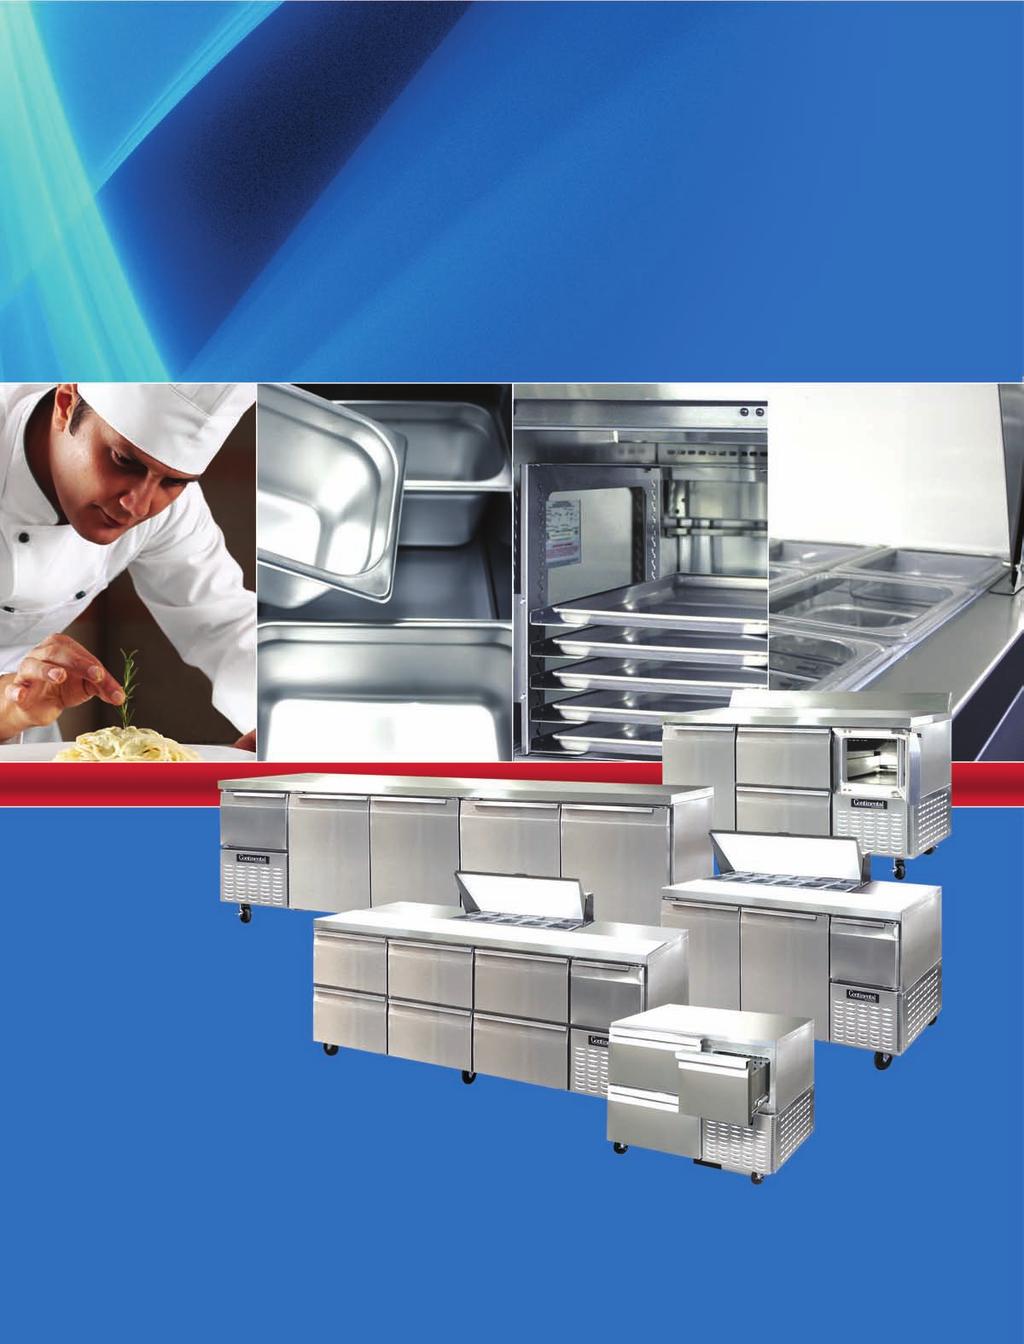 INNOVATIVE DESIGNS FOR YOUR FOODSERVICE NEEDS BASE MODELS WORKTOPS, UNDERCOUNTERS